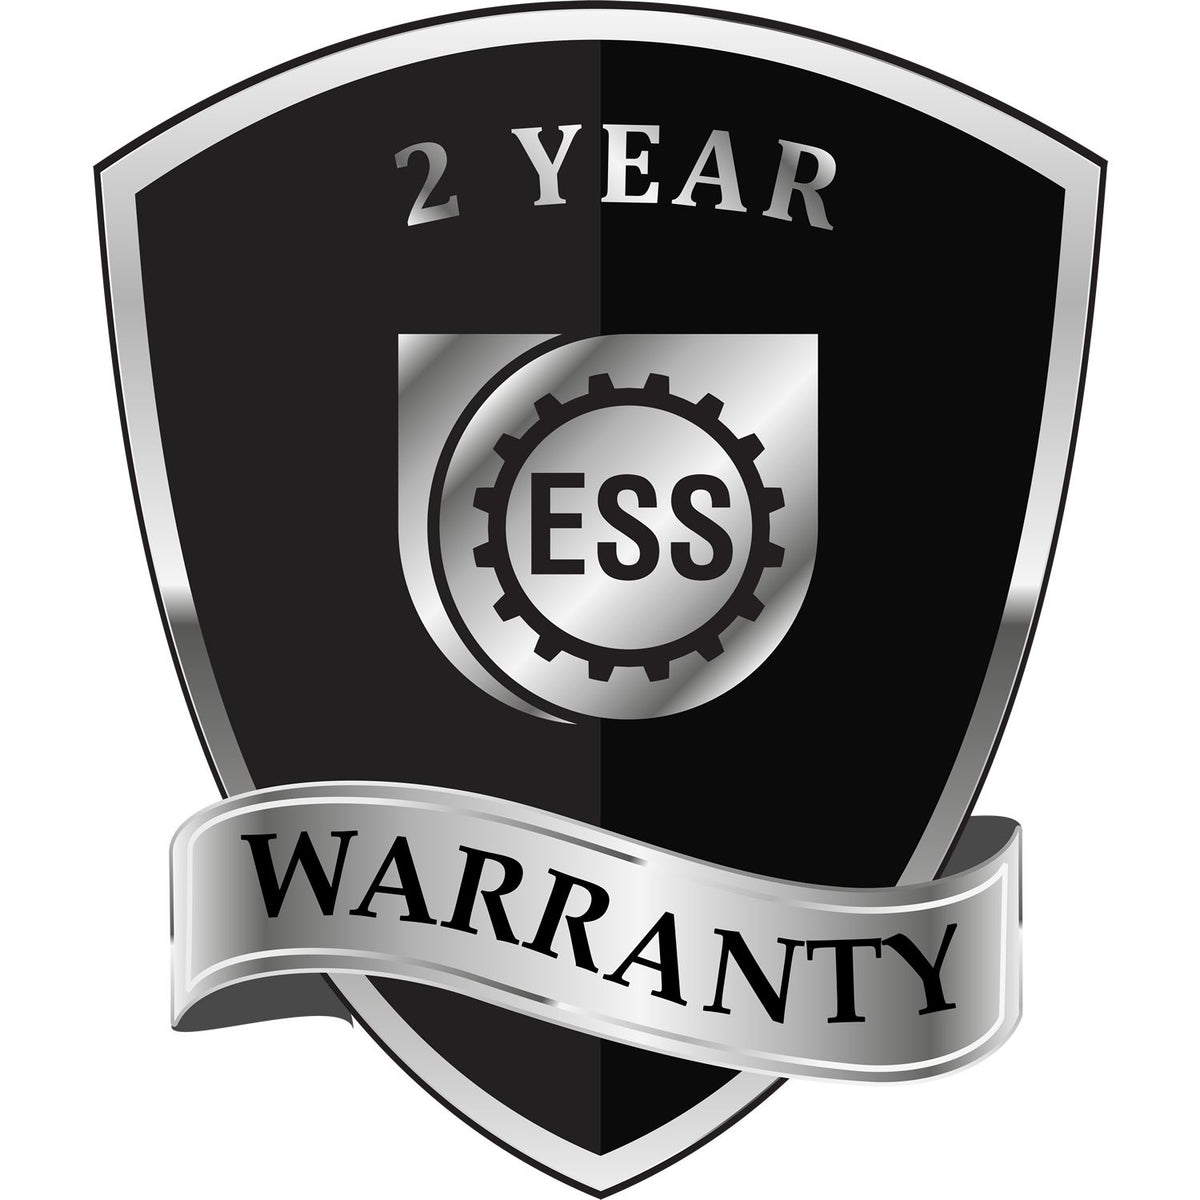 A badge or emblem showing a warranty icon for the State of Texas Extended Long Reach Engineer Seal